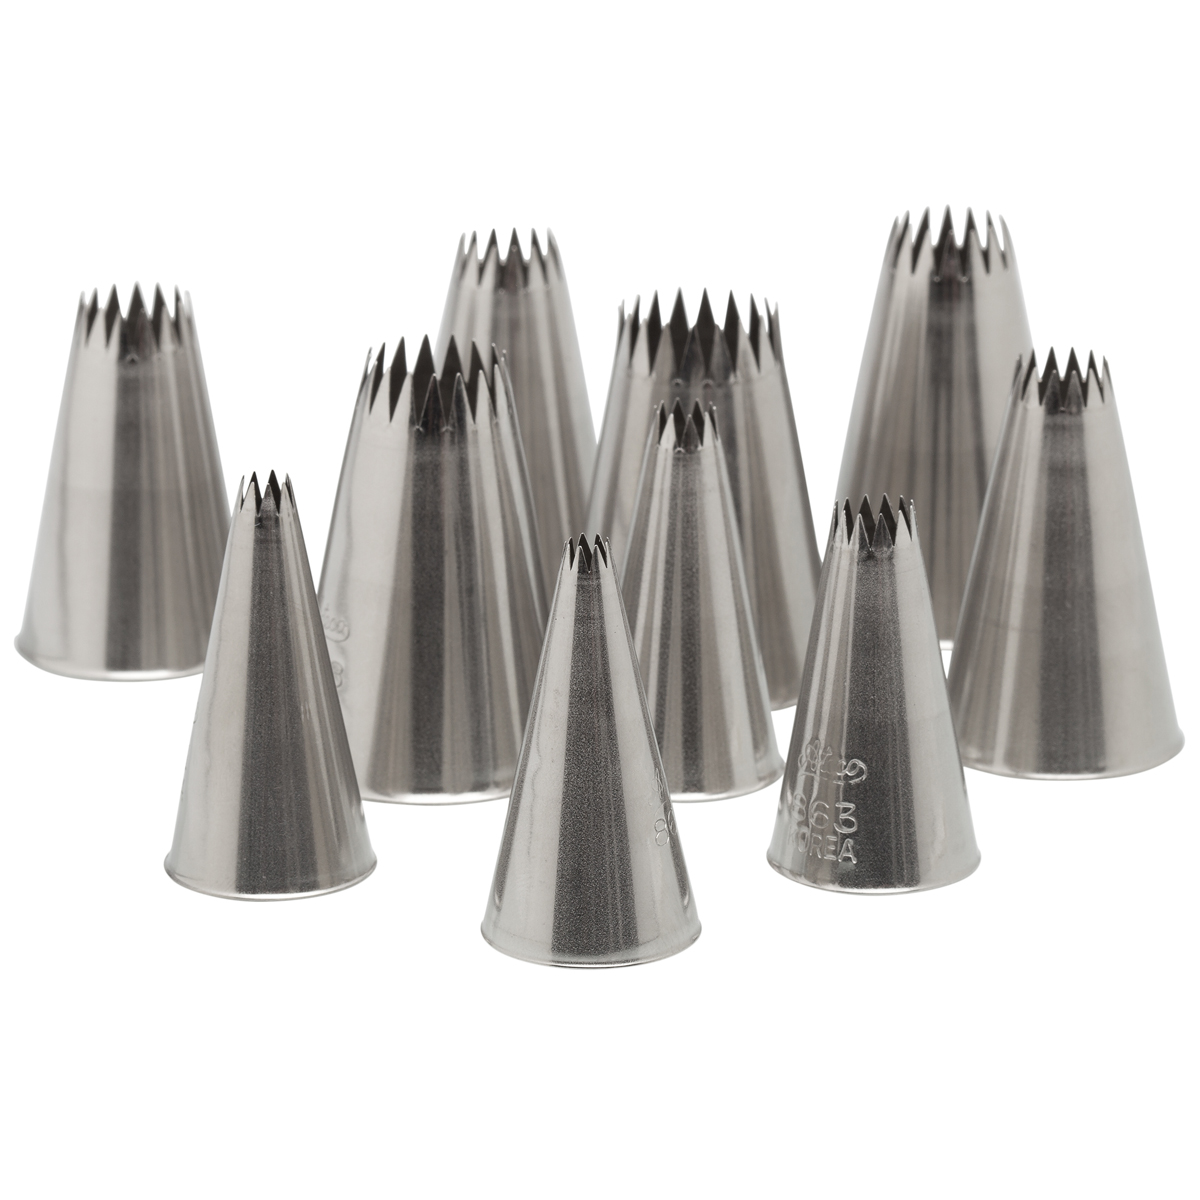  Ateco French Star Pastry Tube Set of 10